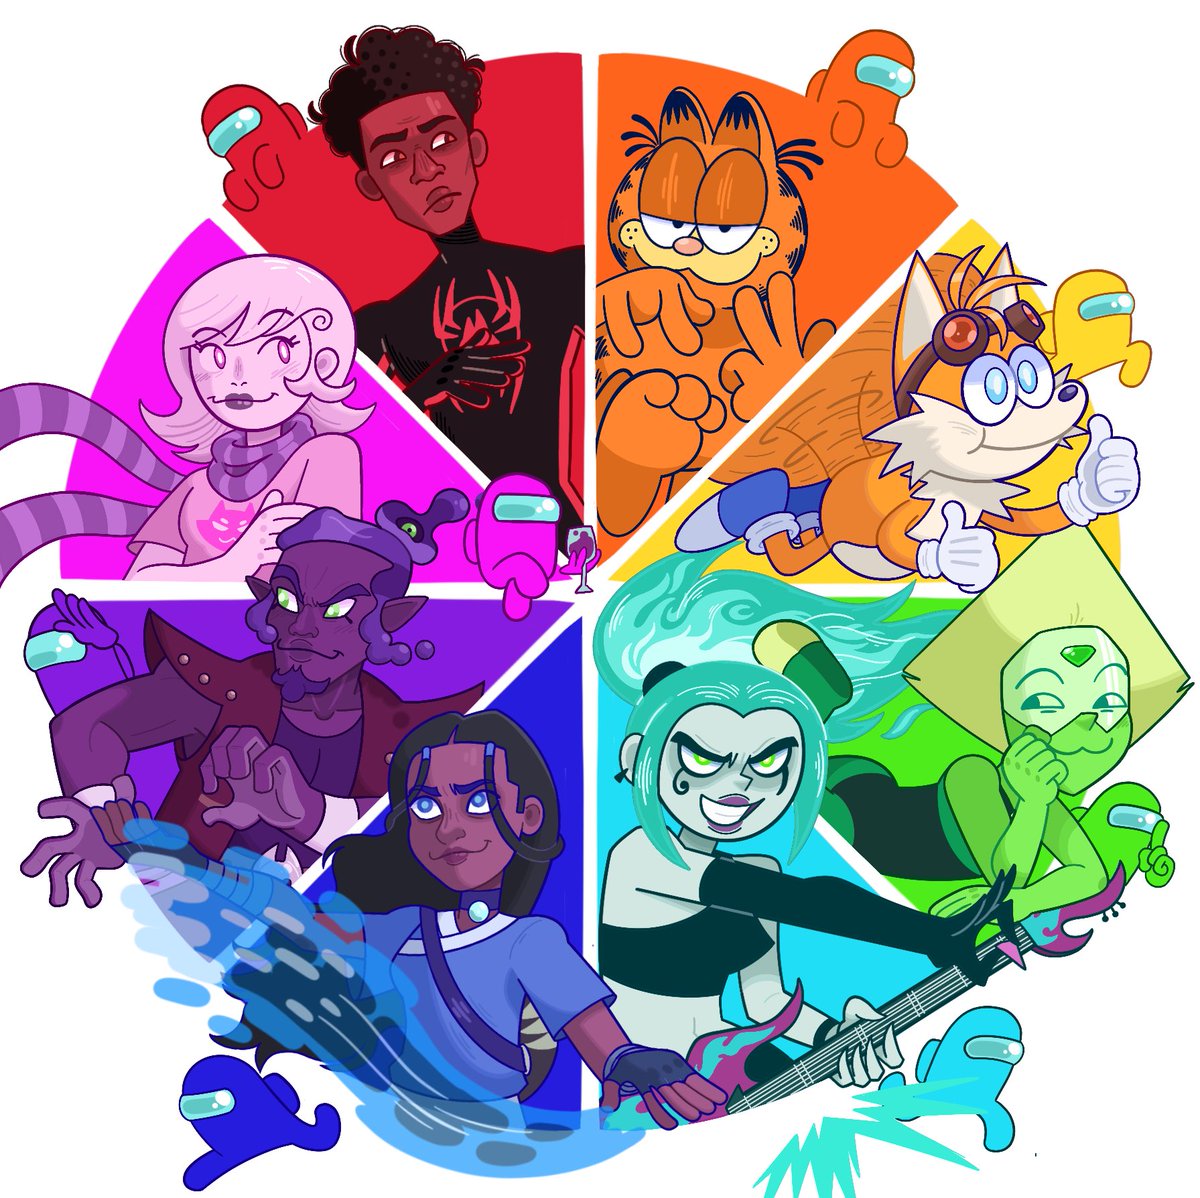 And the color wheel is done! Thank u for all the suggestions! Yes this is homestuck fanart in 2023, also added the amogus guys specifically for @HorseGirlDonald who suggested it under almost every post lol